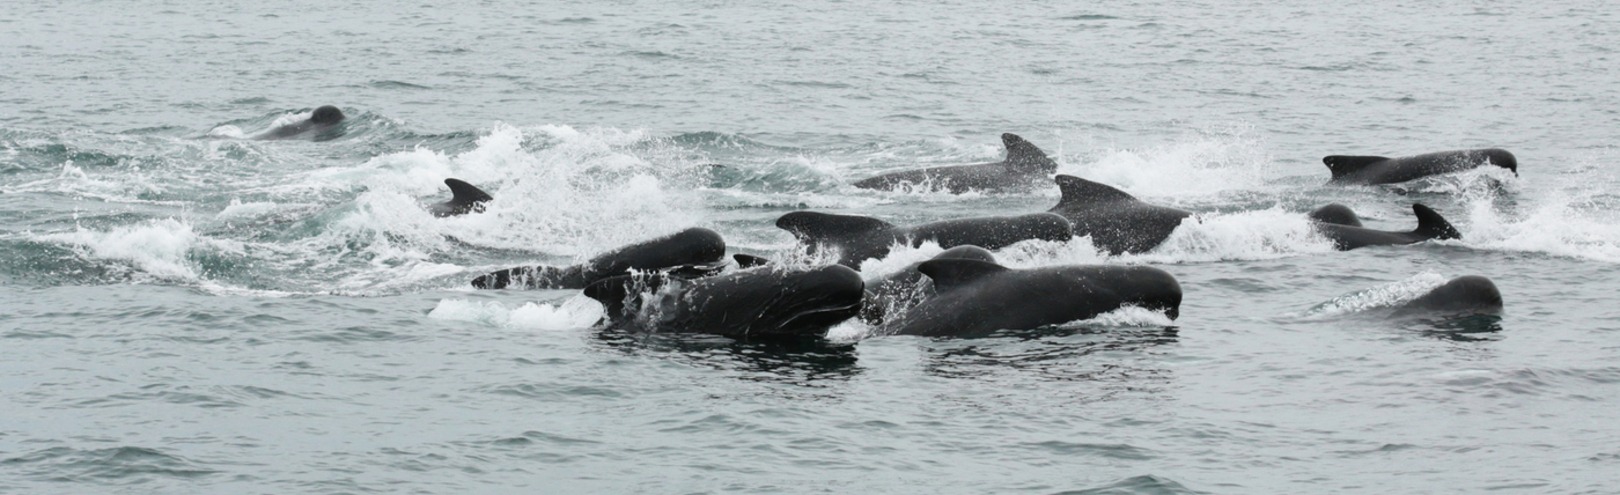 First detailed descriptions of interactions between pilot whales and killer whales - Available at University of Iceland